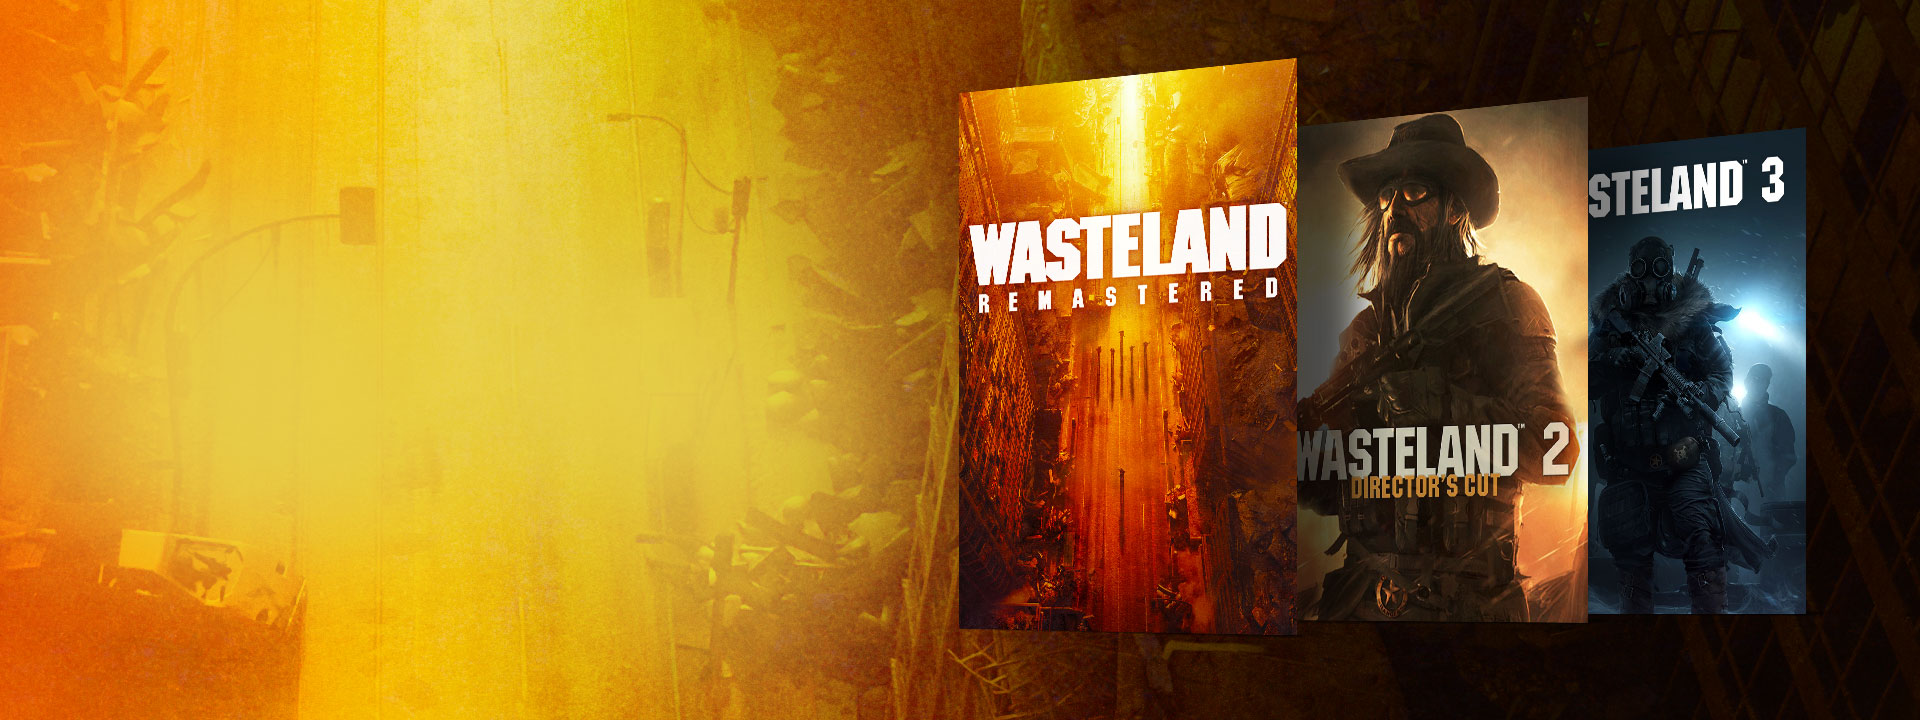 Boxshots of Wasteland Remastered, Wasteland 2 Director’s Cut and Wasteland 3. A background of an abandoned street with yellow and orange hues